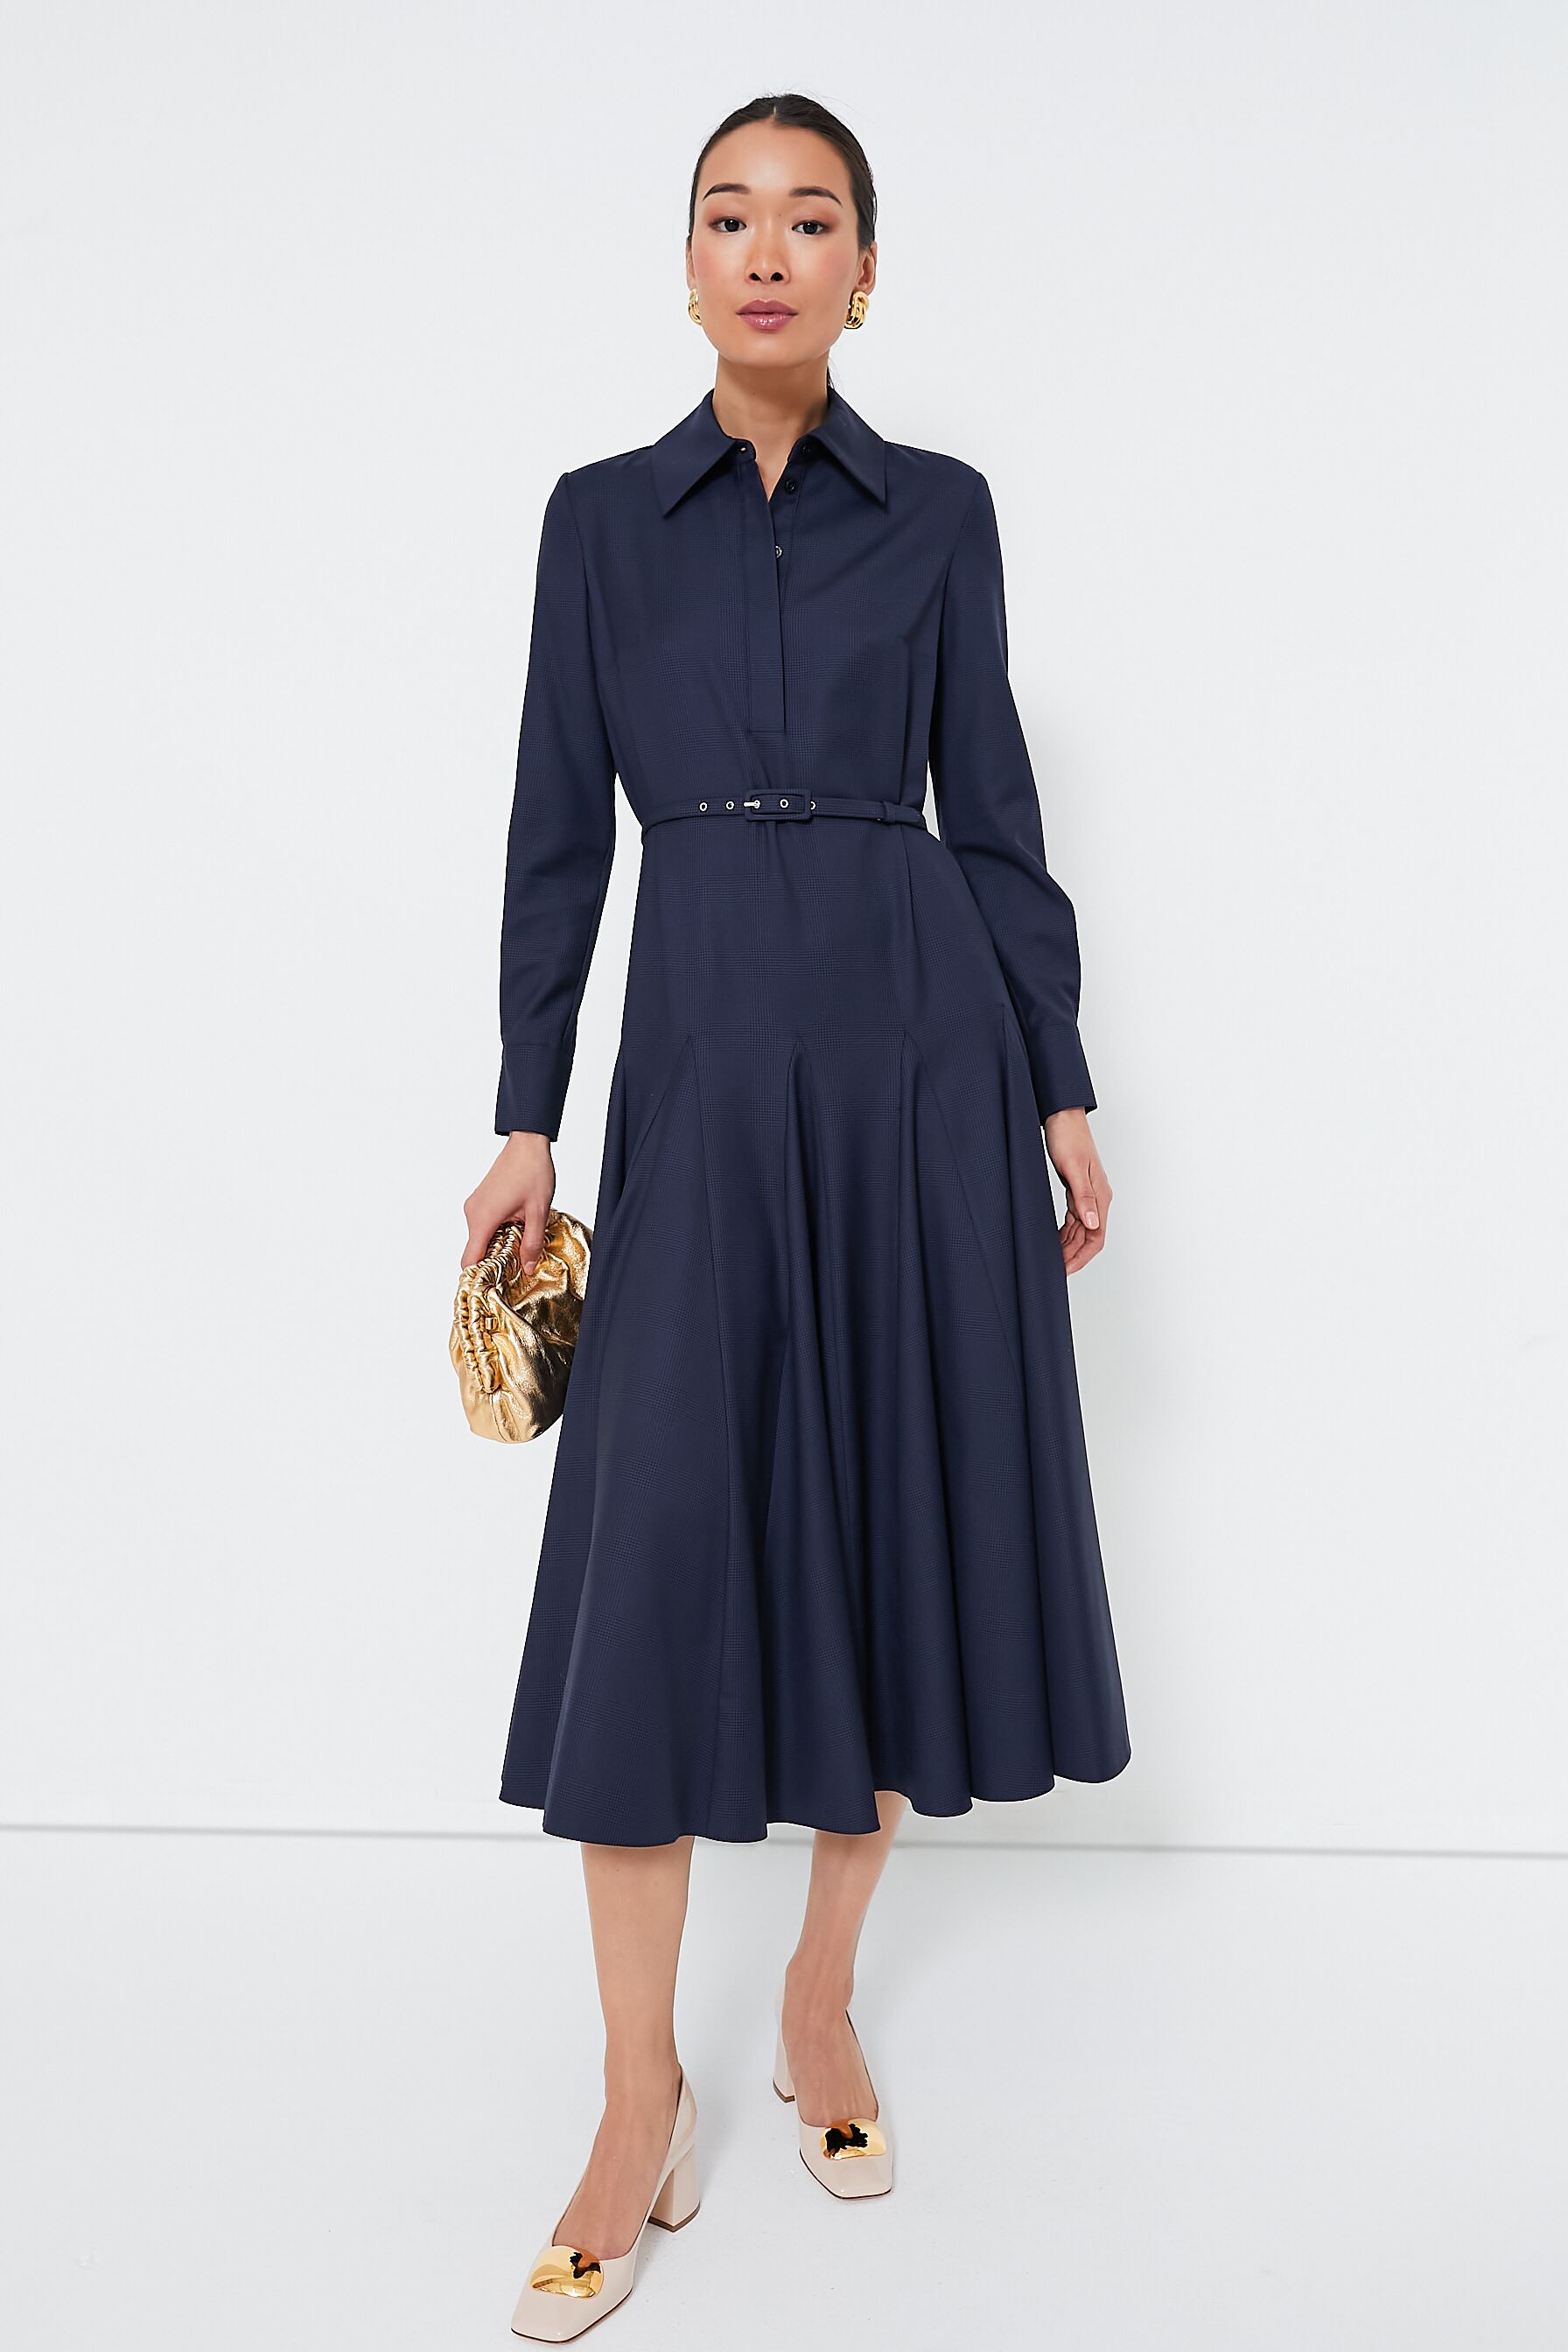 Navy and Black Marione Prince of Wales Dress | Emilia Wickstead